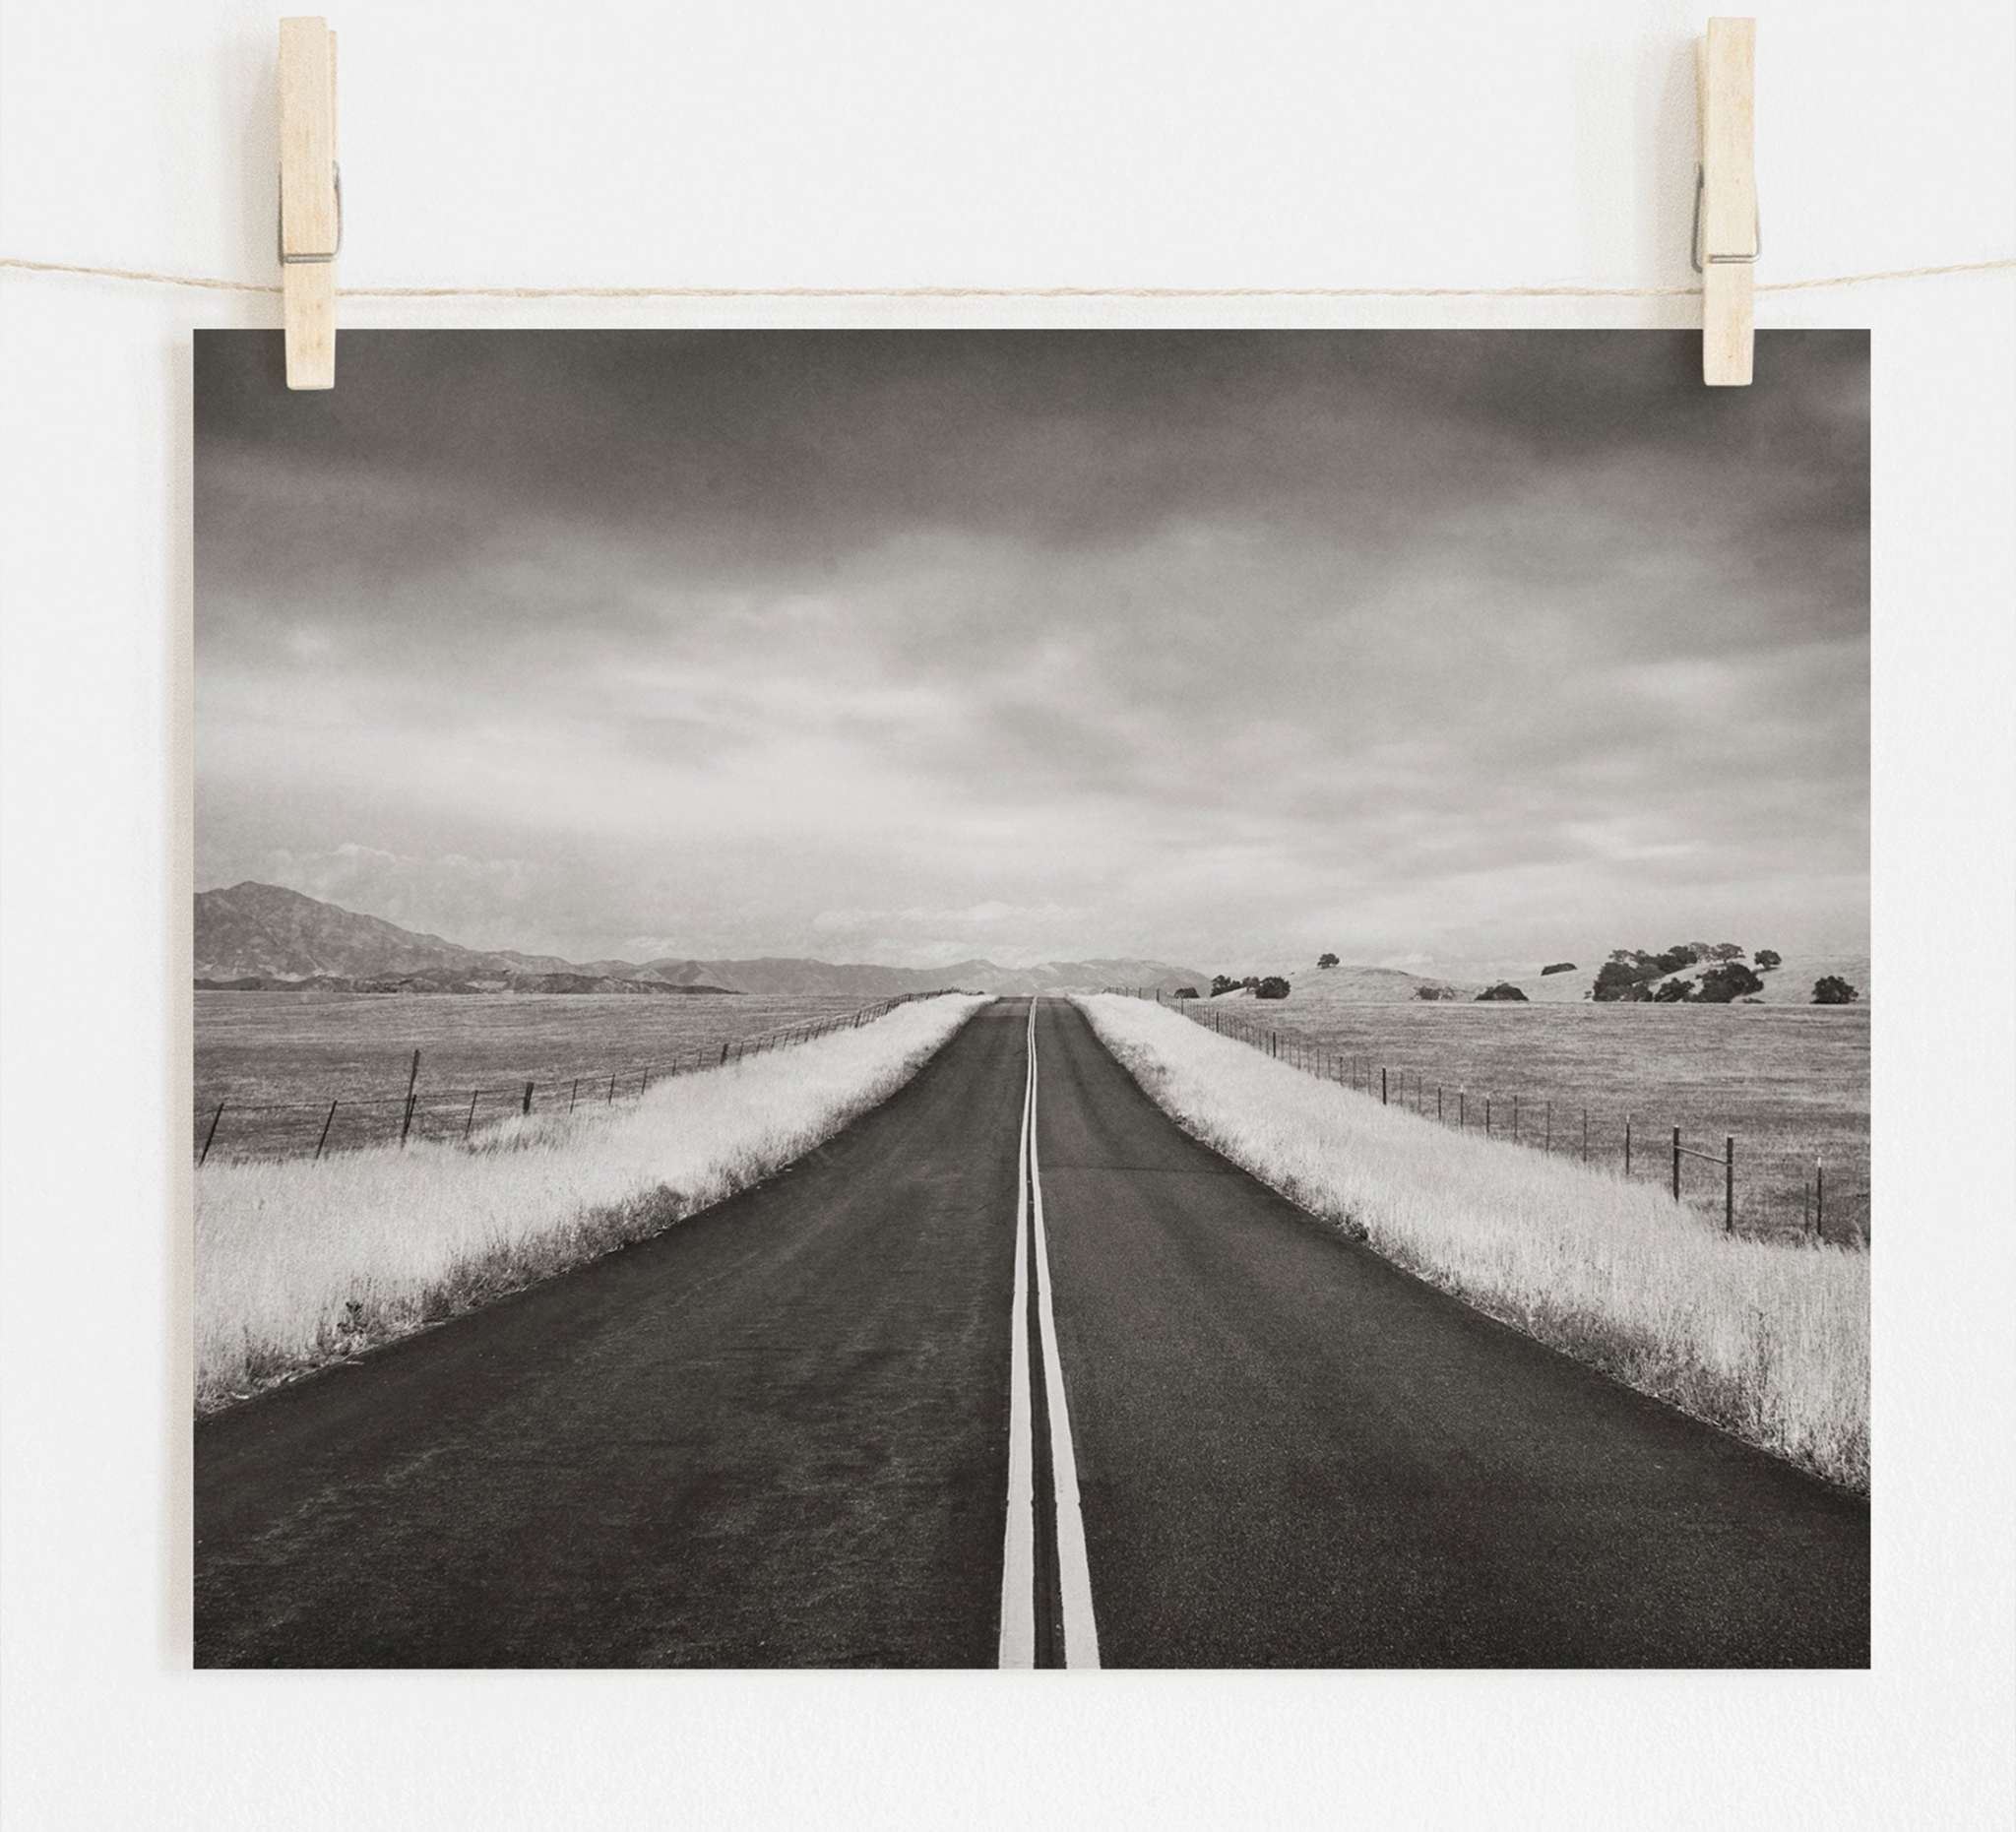 Offley Green's Black and White Rural Landscape Art, 'American Road Trip', printed on archival photographic paper, features an empty road extending into the distance under a cloudy sky, flanked by fields and mountains in sepia tones.